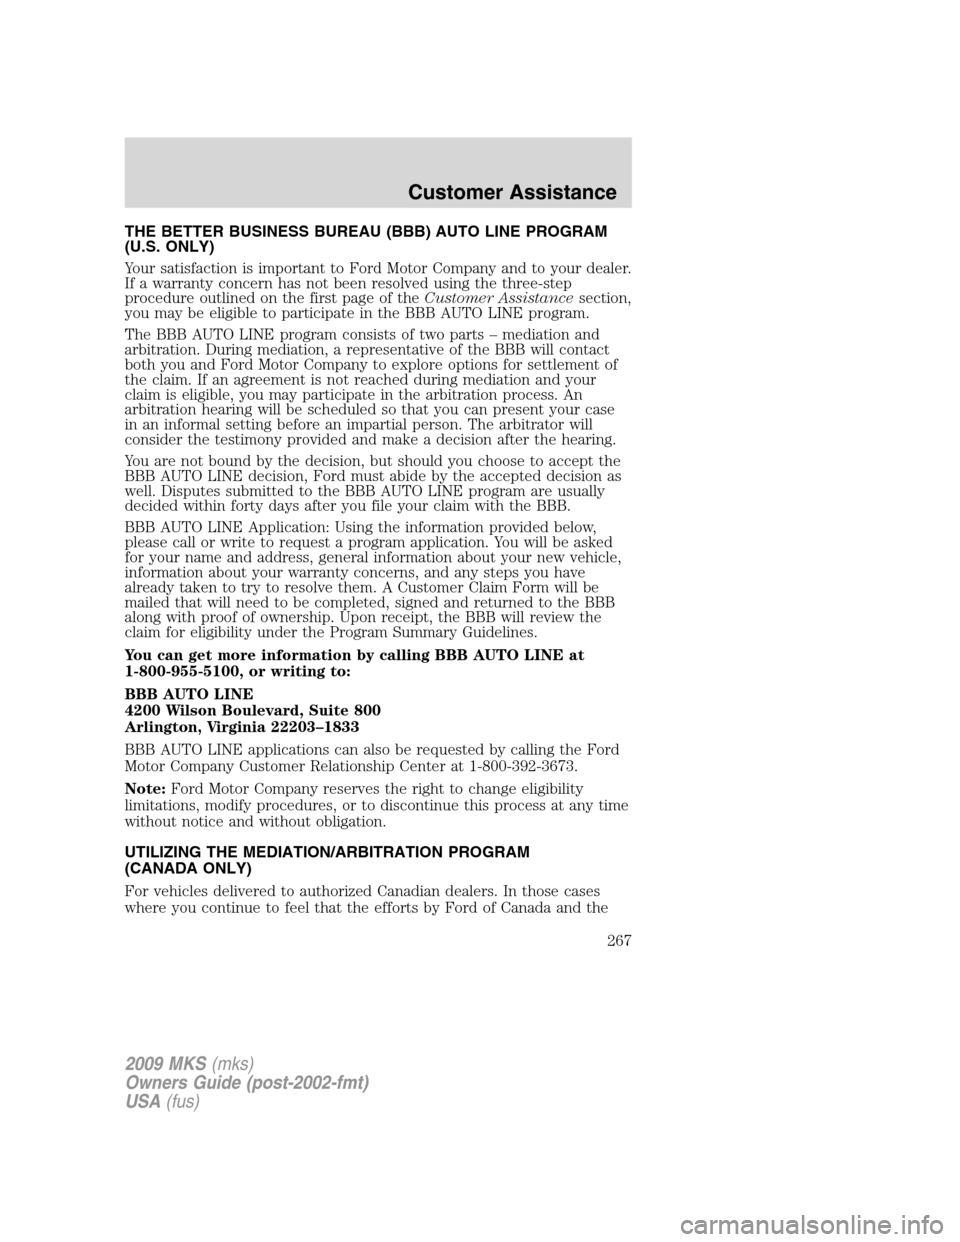 LINCOLN MKS 2009  Owners Manual THE BETTER BUSINESS BUREAU (BBB) AUTO LINE PROGRAM
(U.S. ONLY)
Your satisfaction is important to Ford Motor Company and to your dealer.
If a warranty concern has not been resolved using the three-step